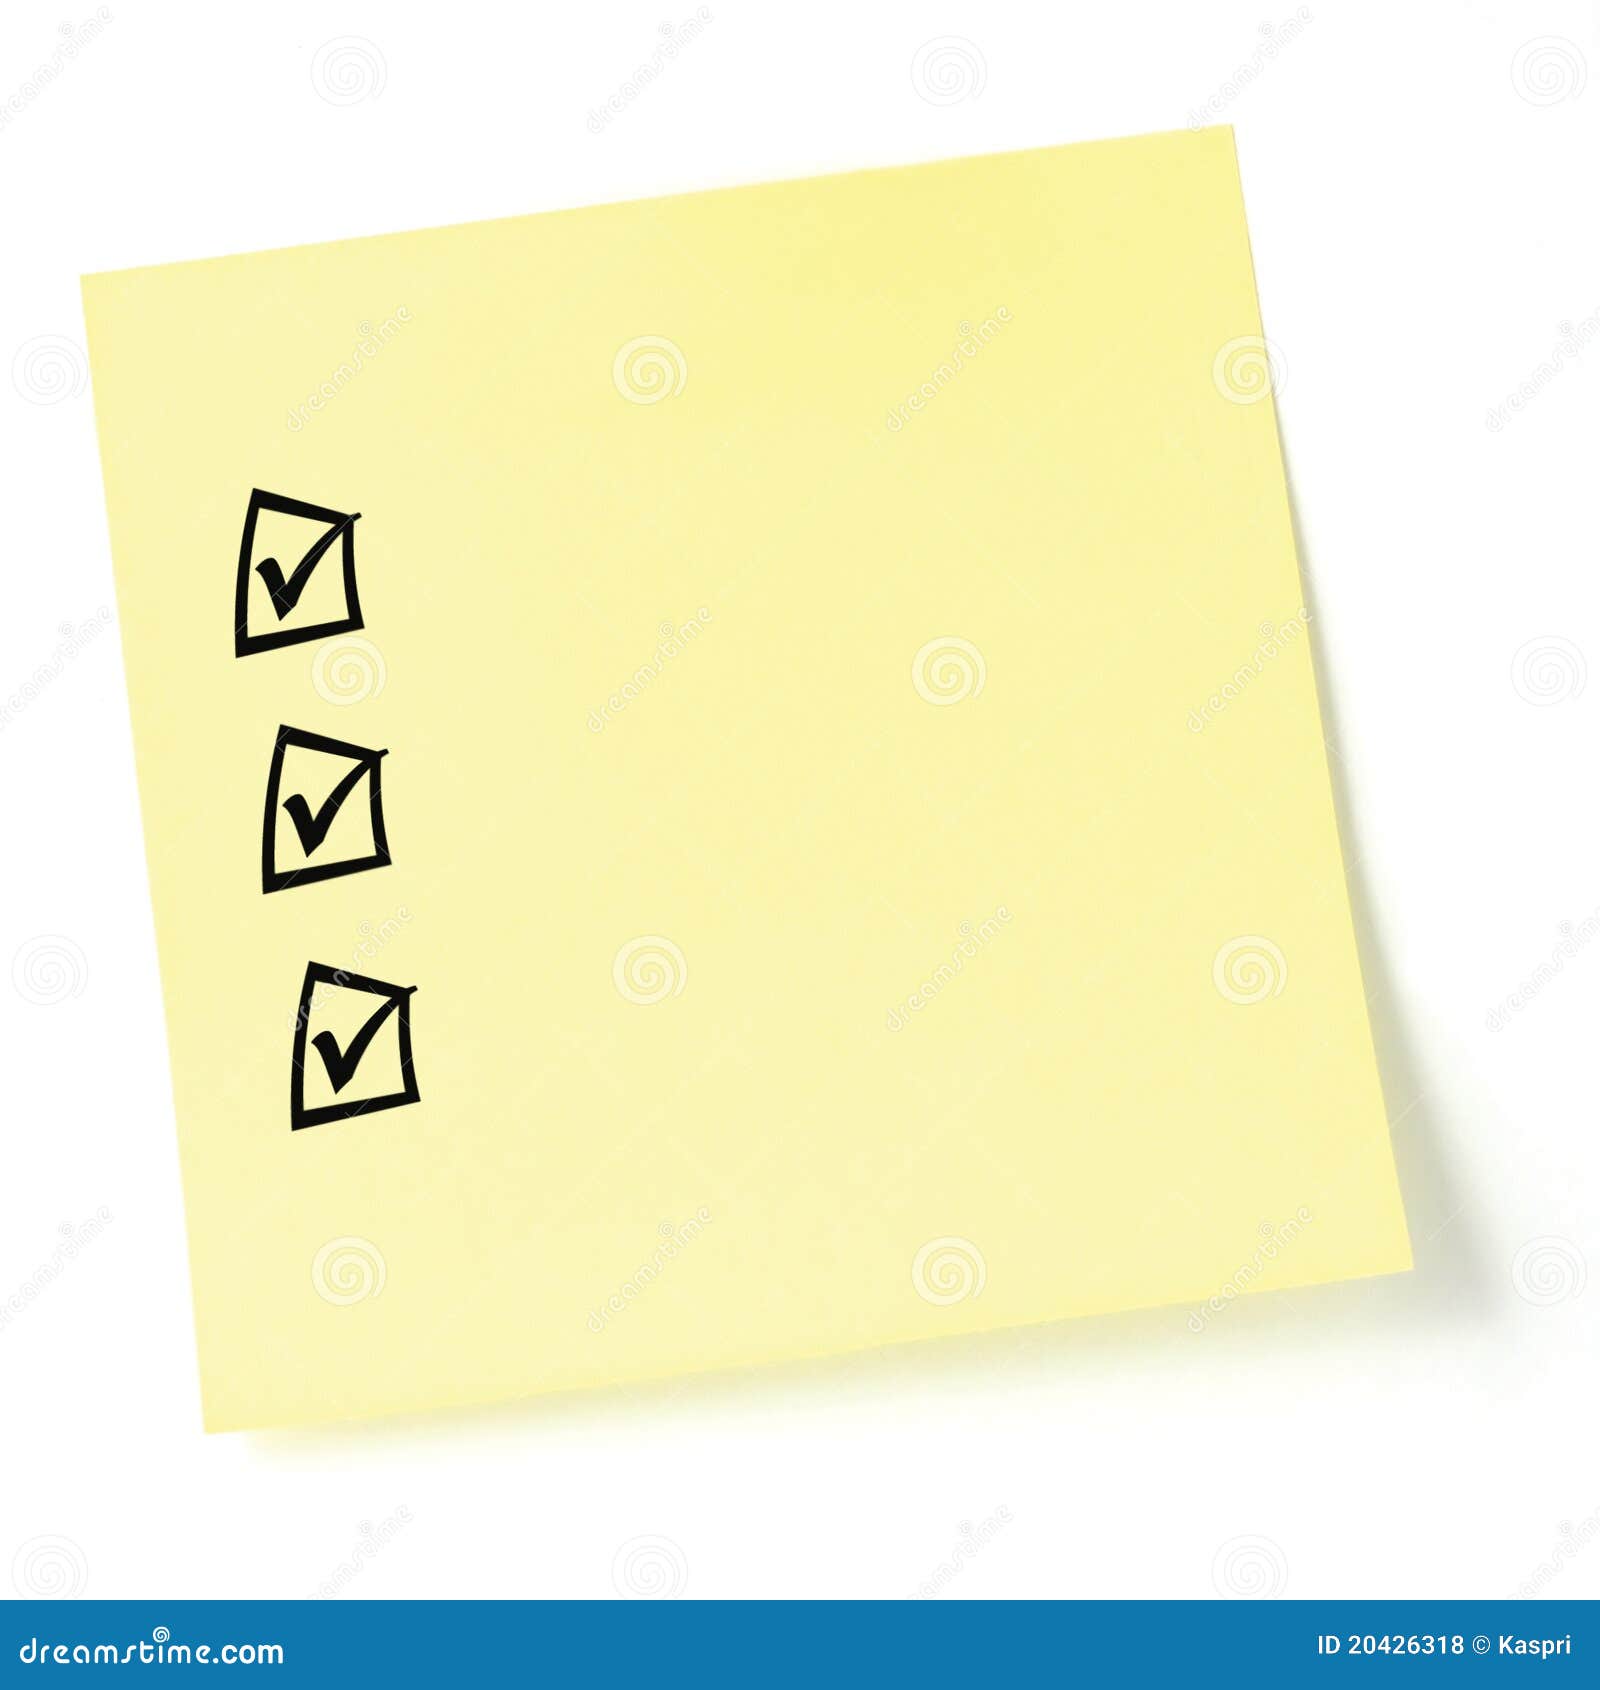 392 Check List Note Post Photos Free Royalty Free Stock Photos From Dreamstime